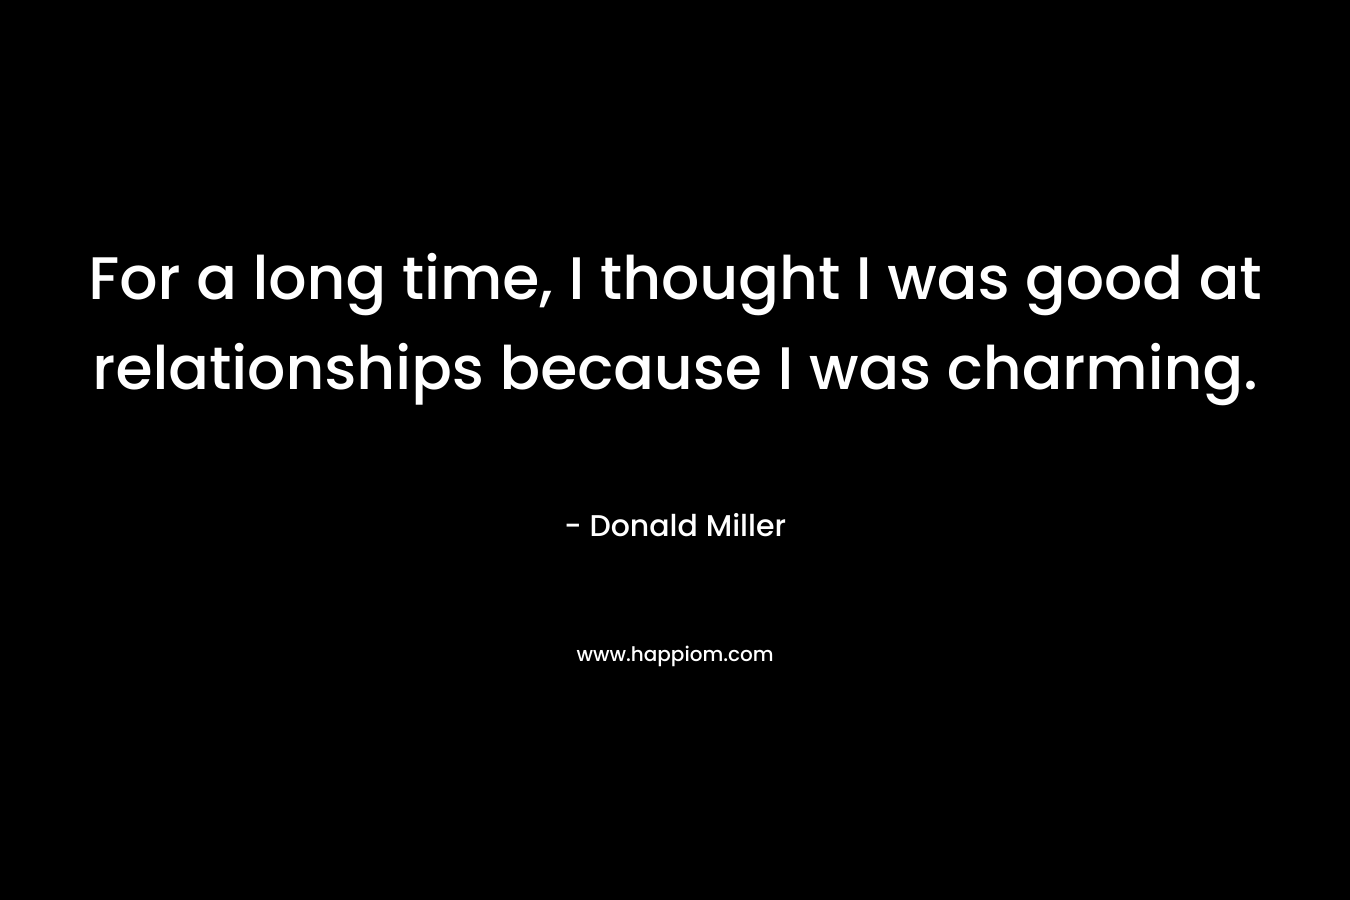 For a long time, I thought I was good at relationships because I was charming.